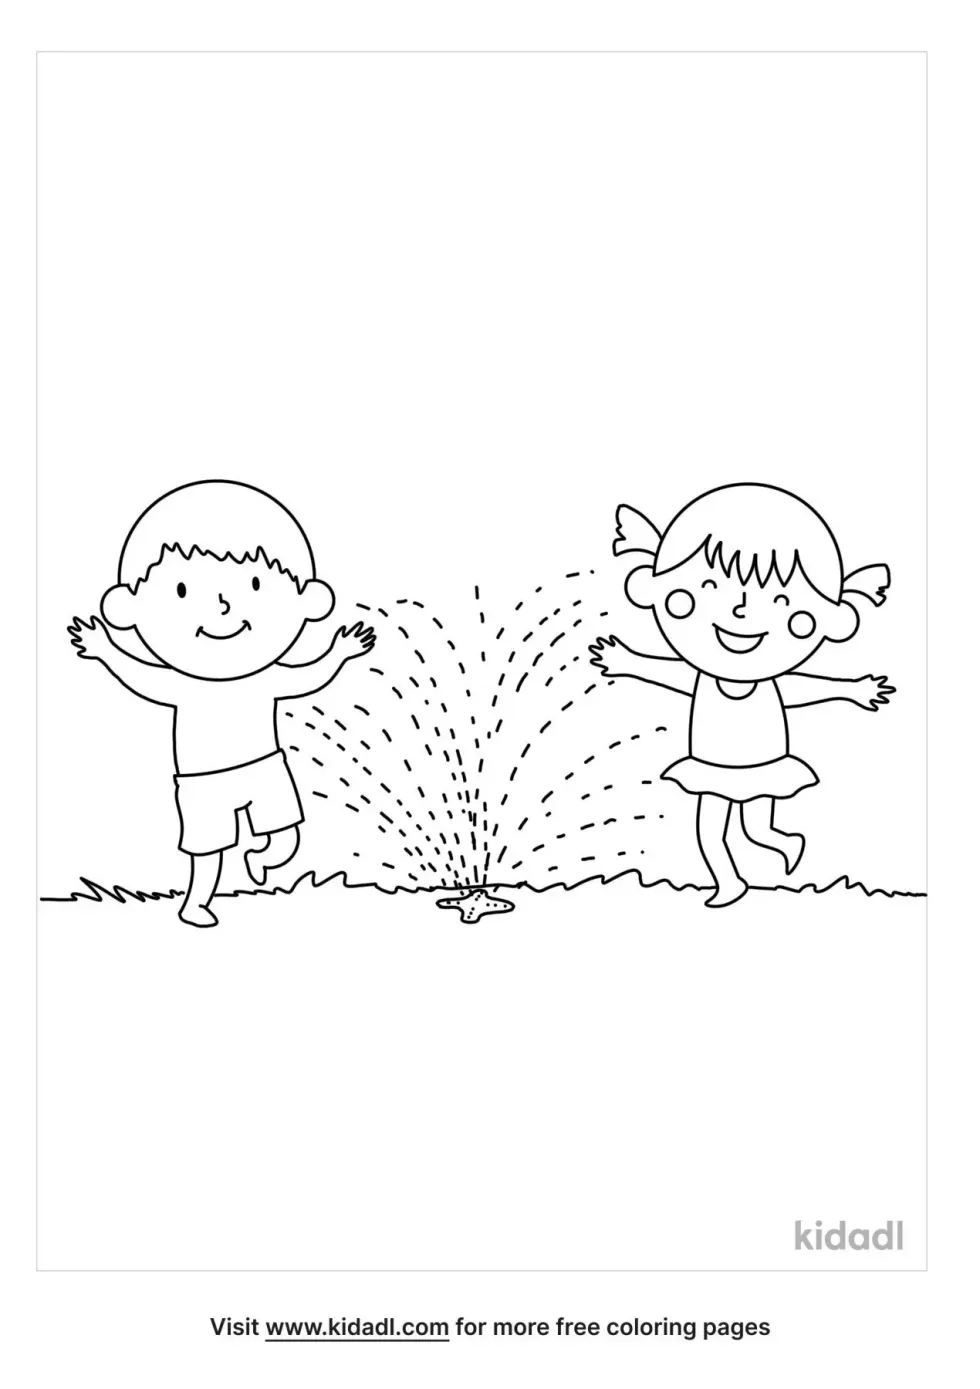 Kids And Sprinkler Coloring Page